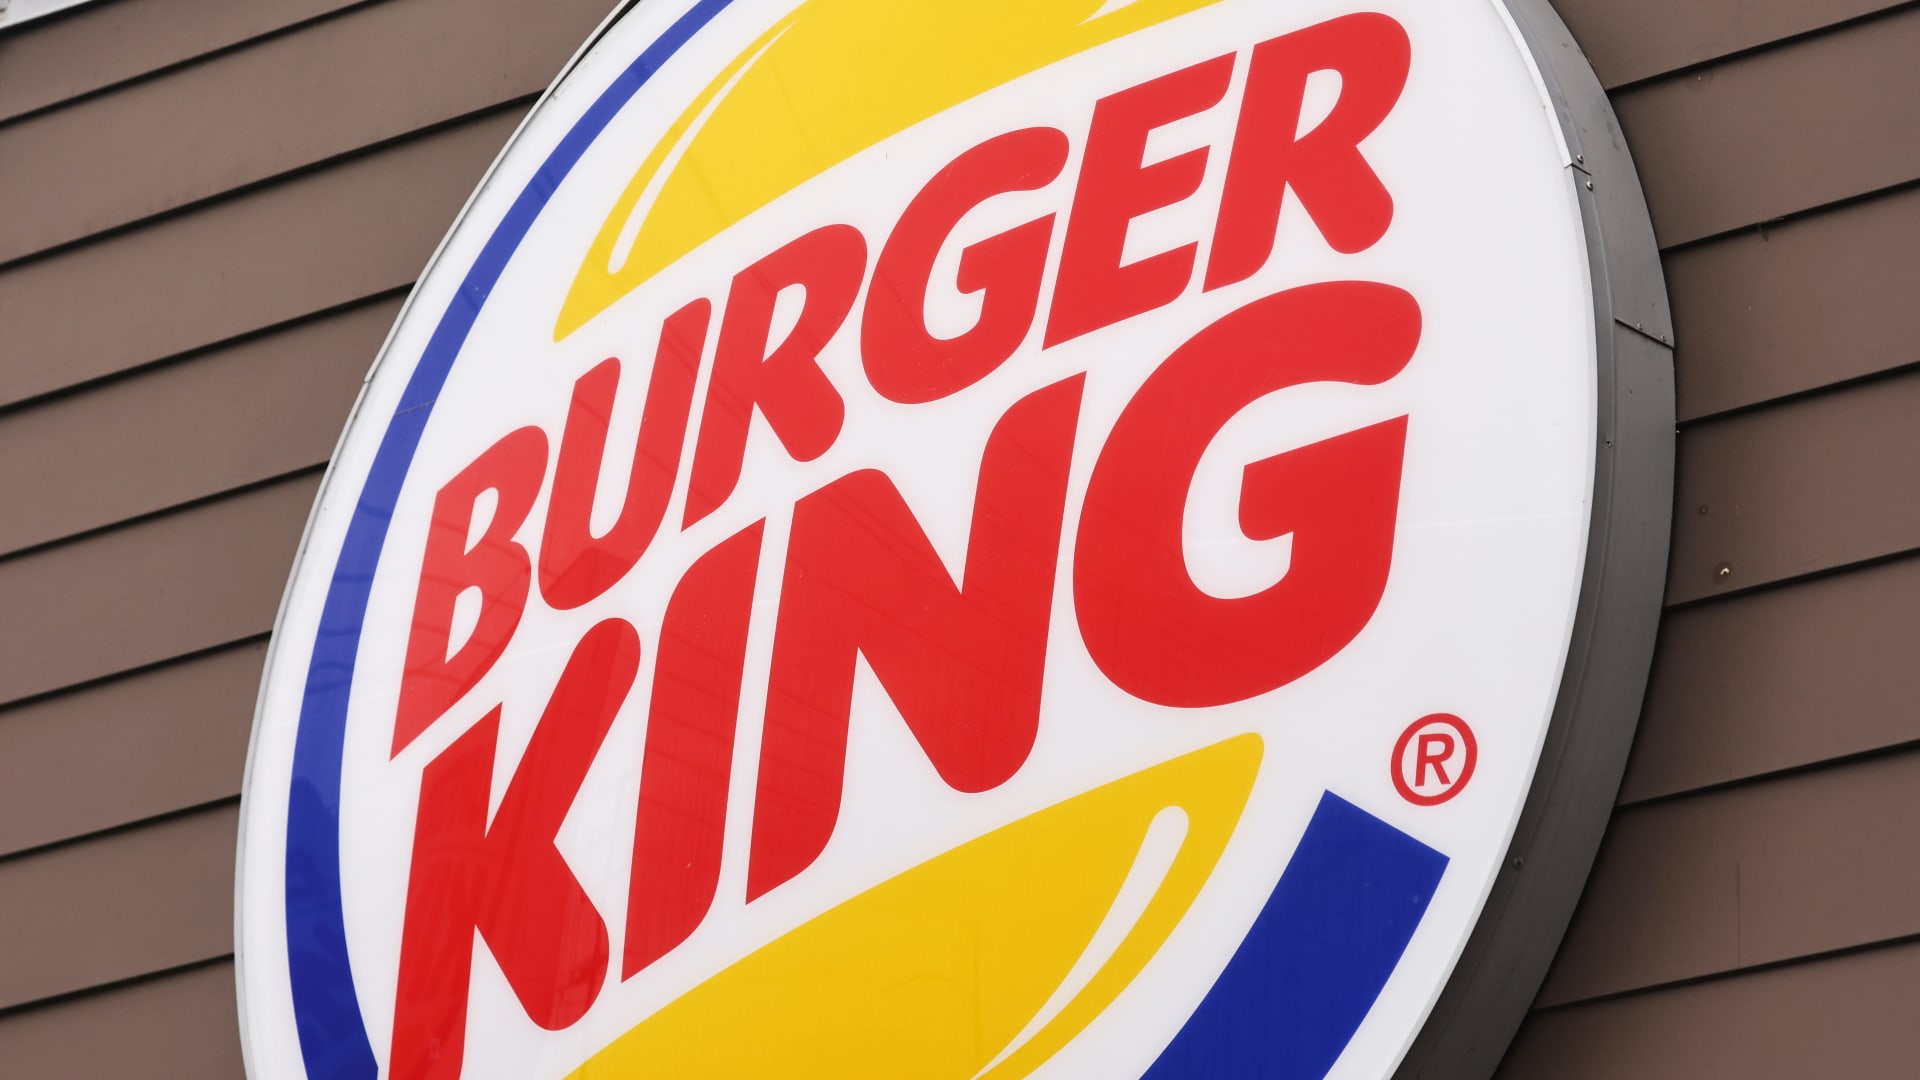 Restaurant Brands' Patrick Doyle says Burger King's varied prices help customers burdened by inflation - CNBC